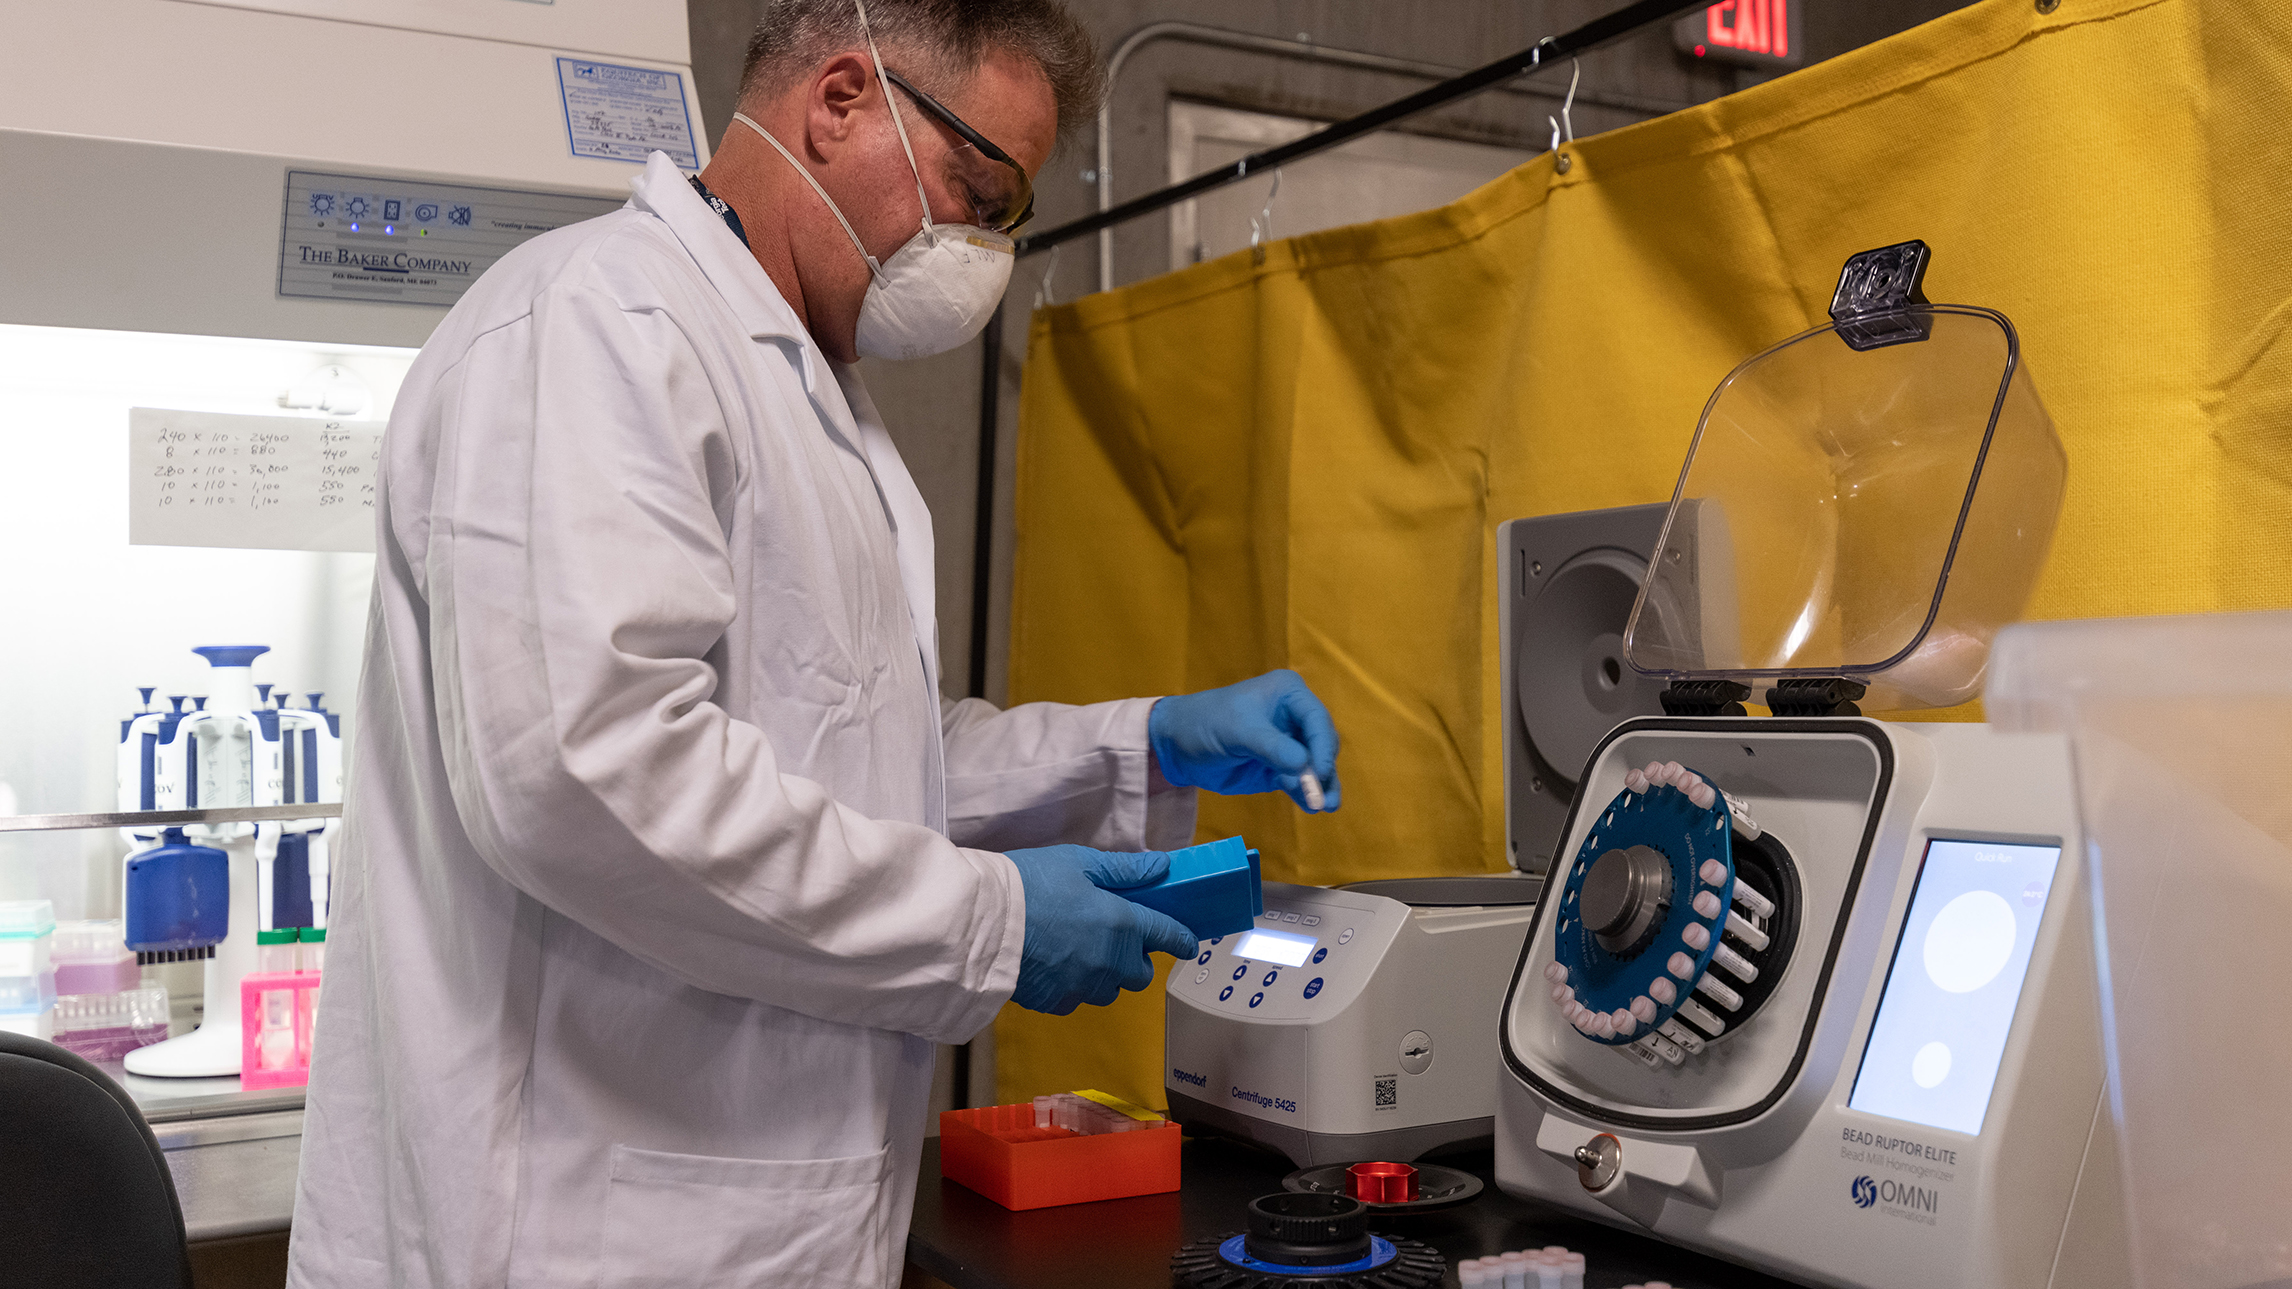 Michael Farrell, a principal research scientist at the Georgia Tech Research Institute, places vials into a Bioruptor device used to liquify saliva samples for testing. (Credit: Rob Felt, Georgia Tech)